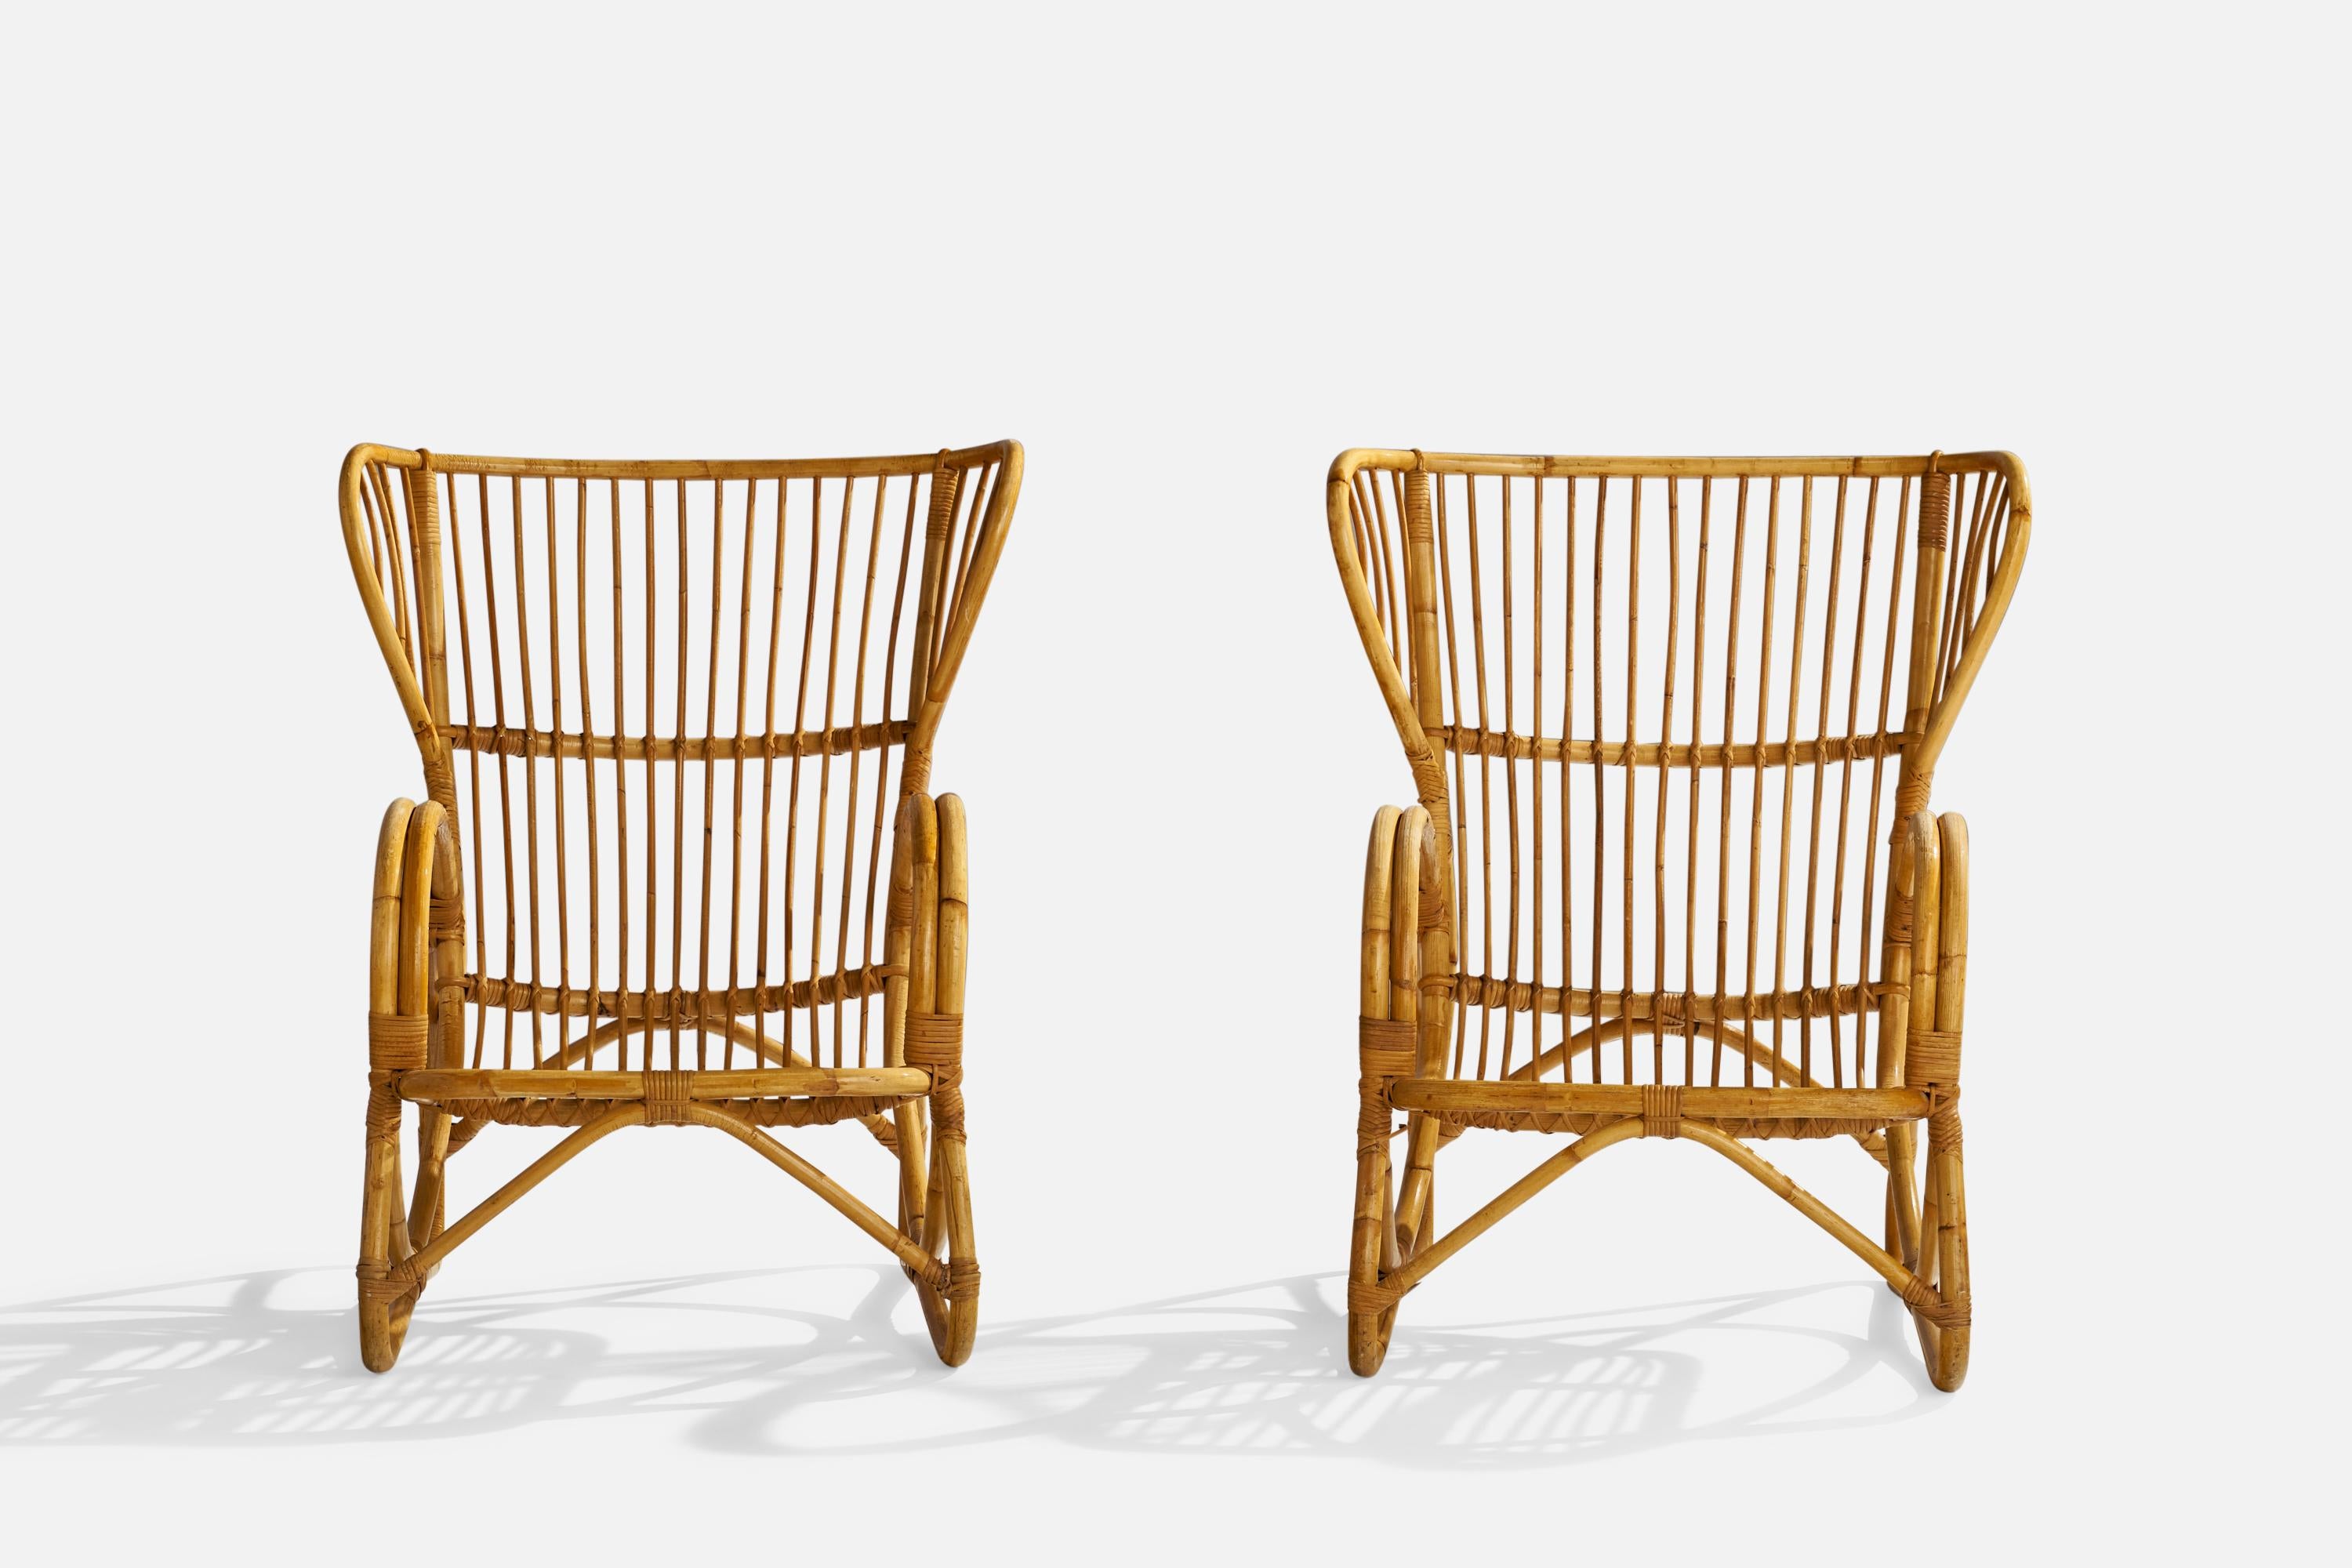 Mid-20th Century Swedish Designer, Lounge Chairs, Bamboo, Rattan, Sweden, 1950s For Sale